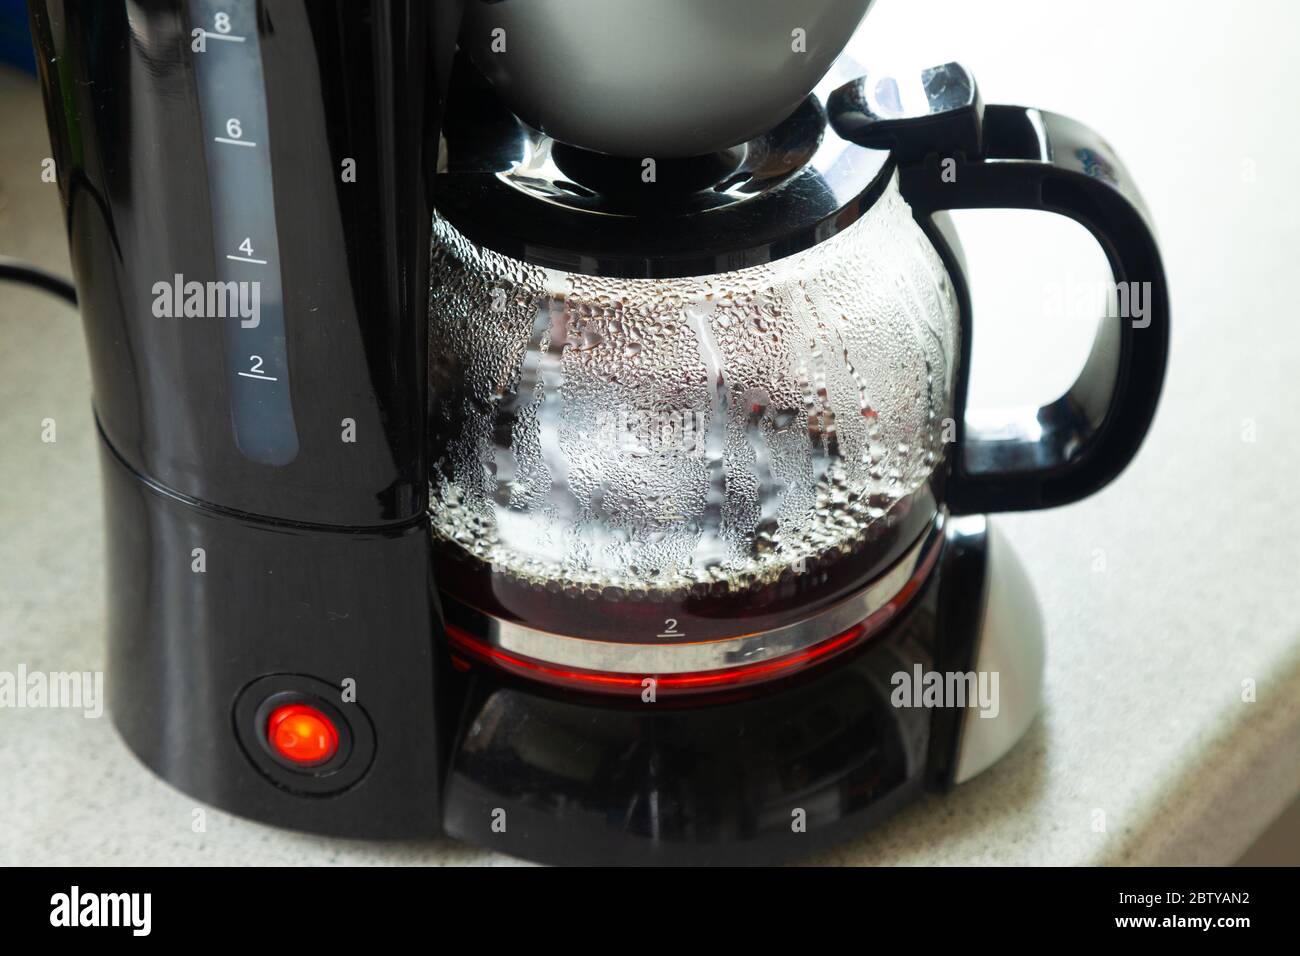 Close-Up of a plastic coffee maker making a fresh brew. Stock Photo